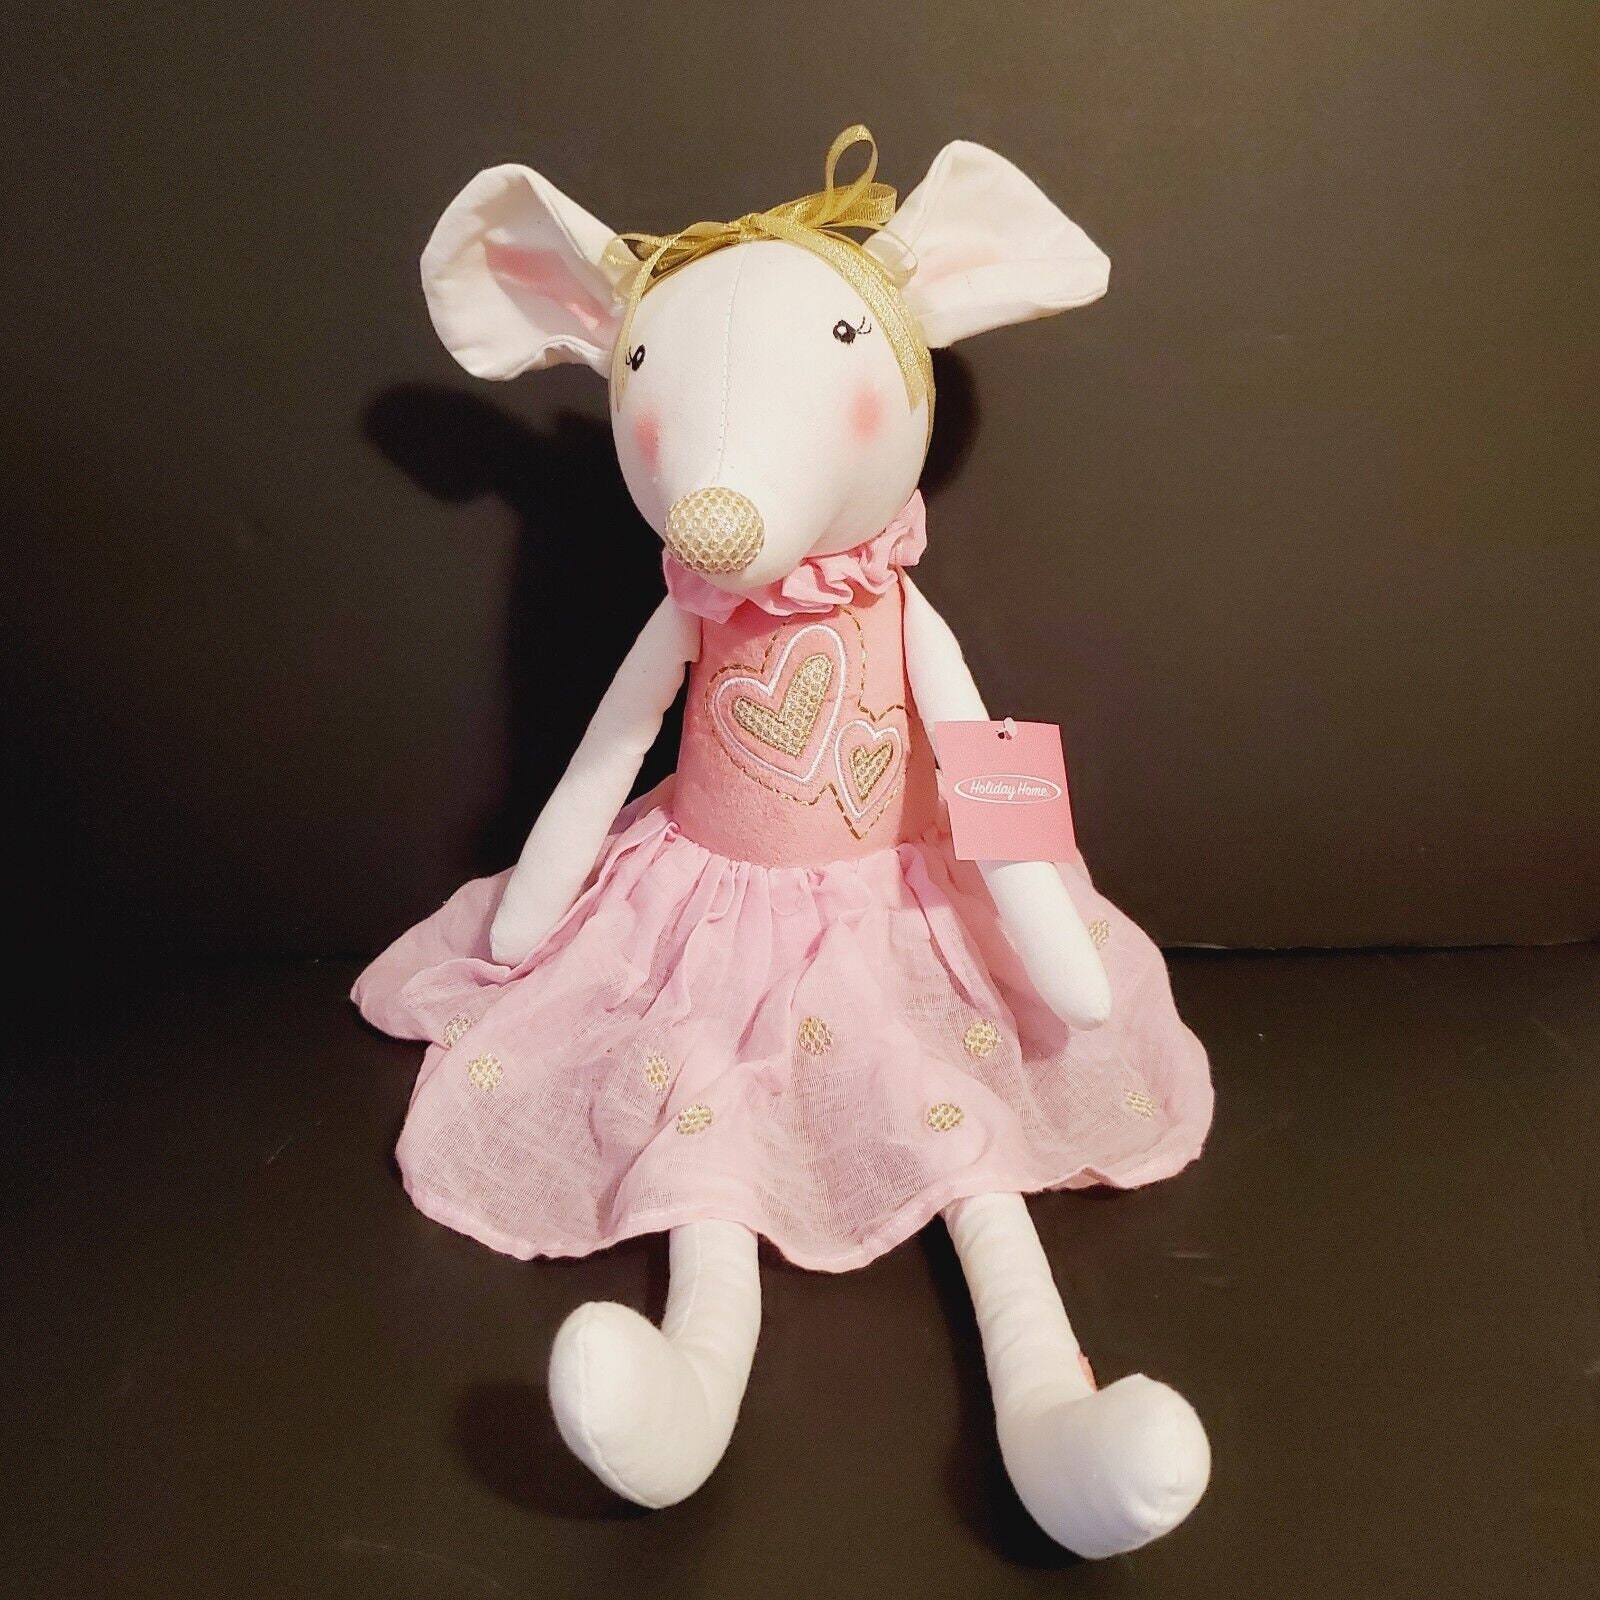 Pink Ballerina Mouse Dress-Up Toy (25cm)